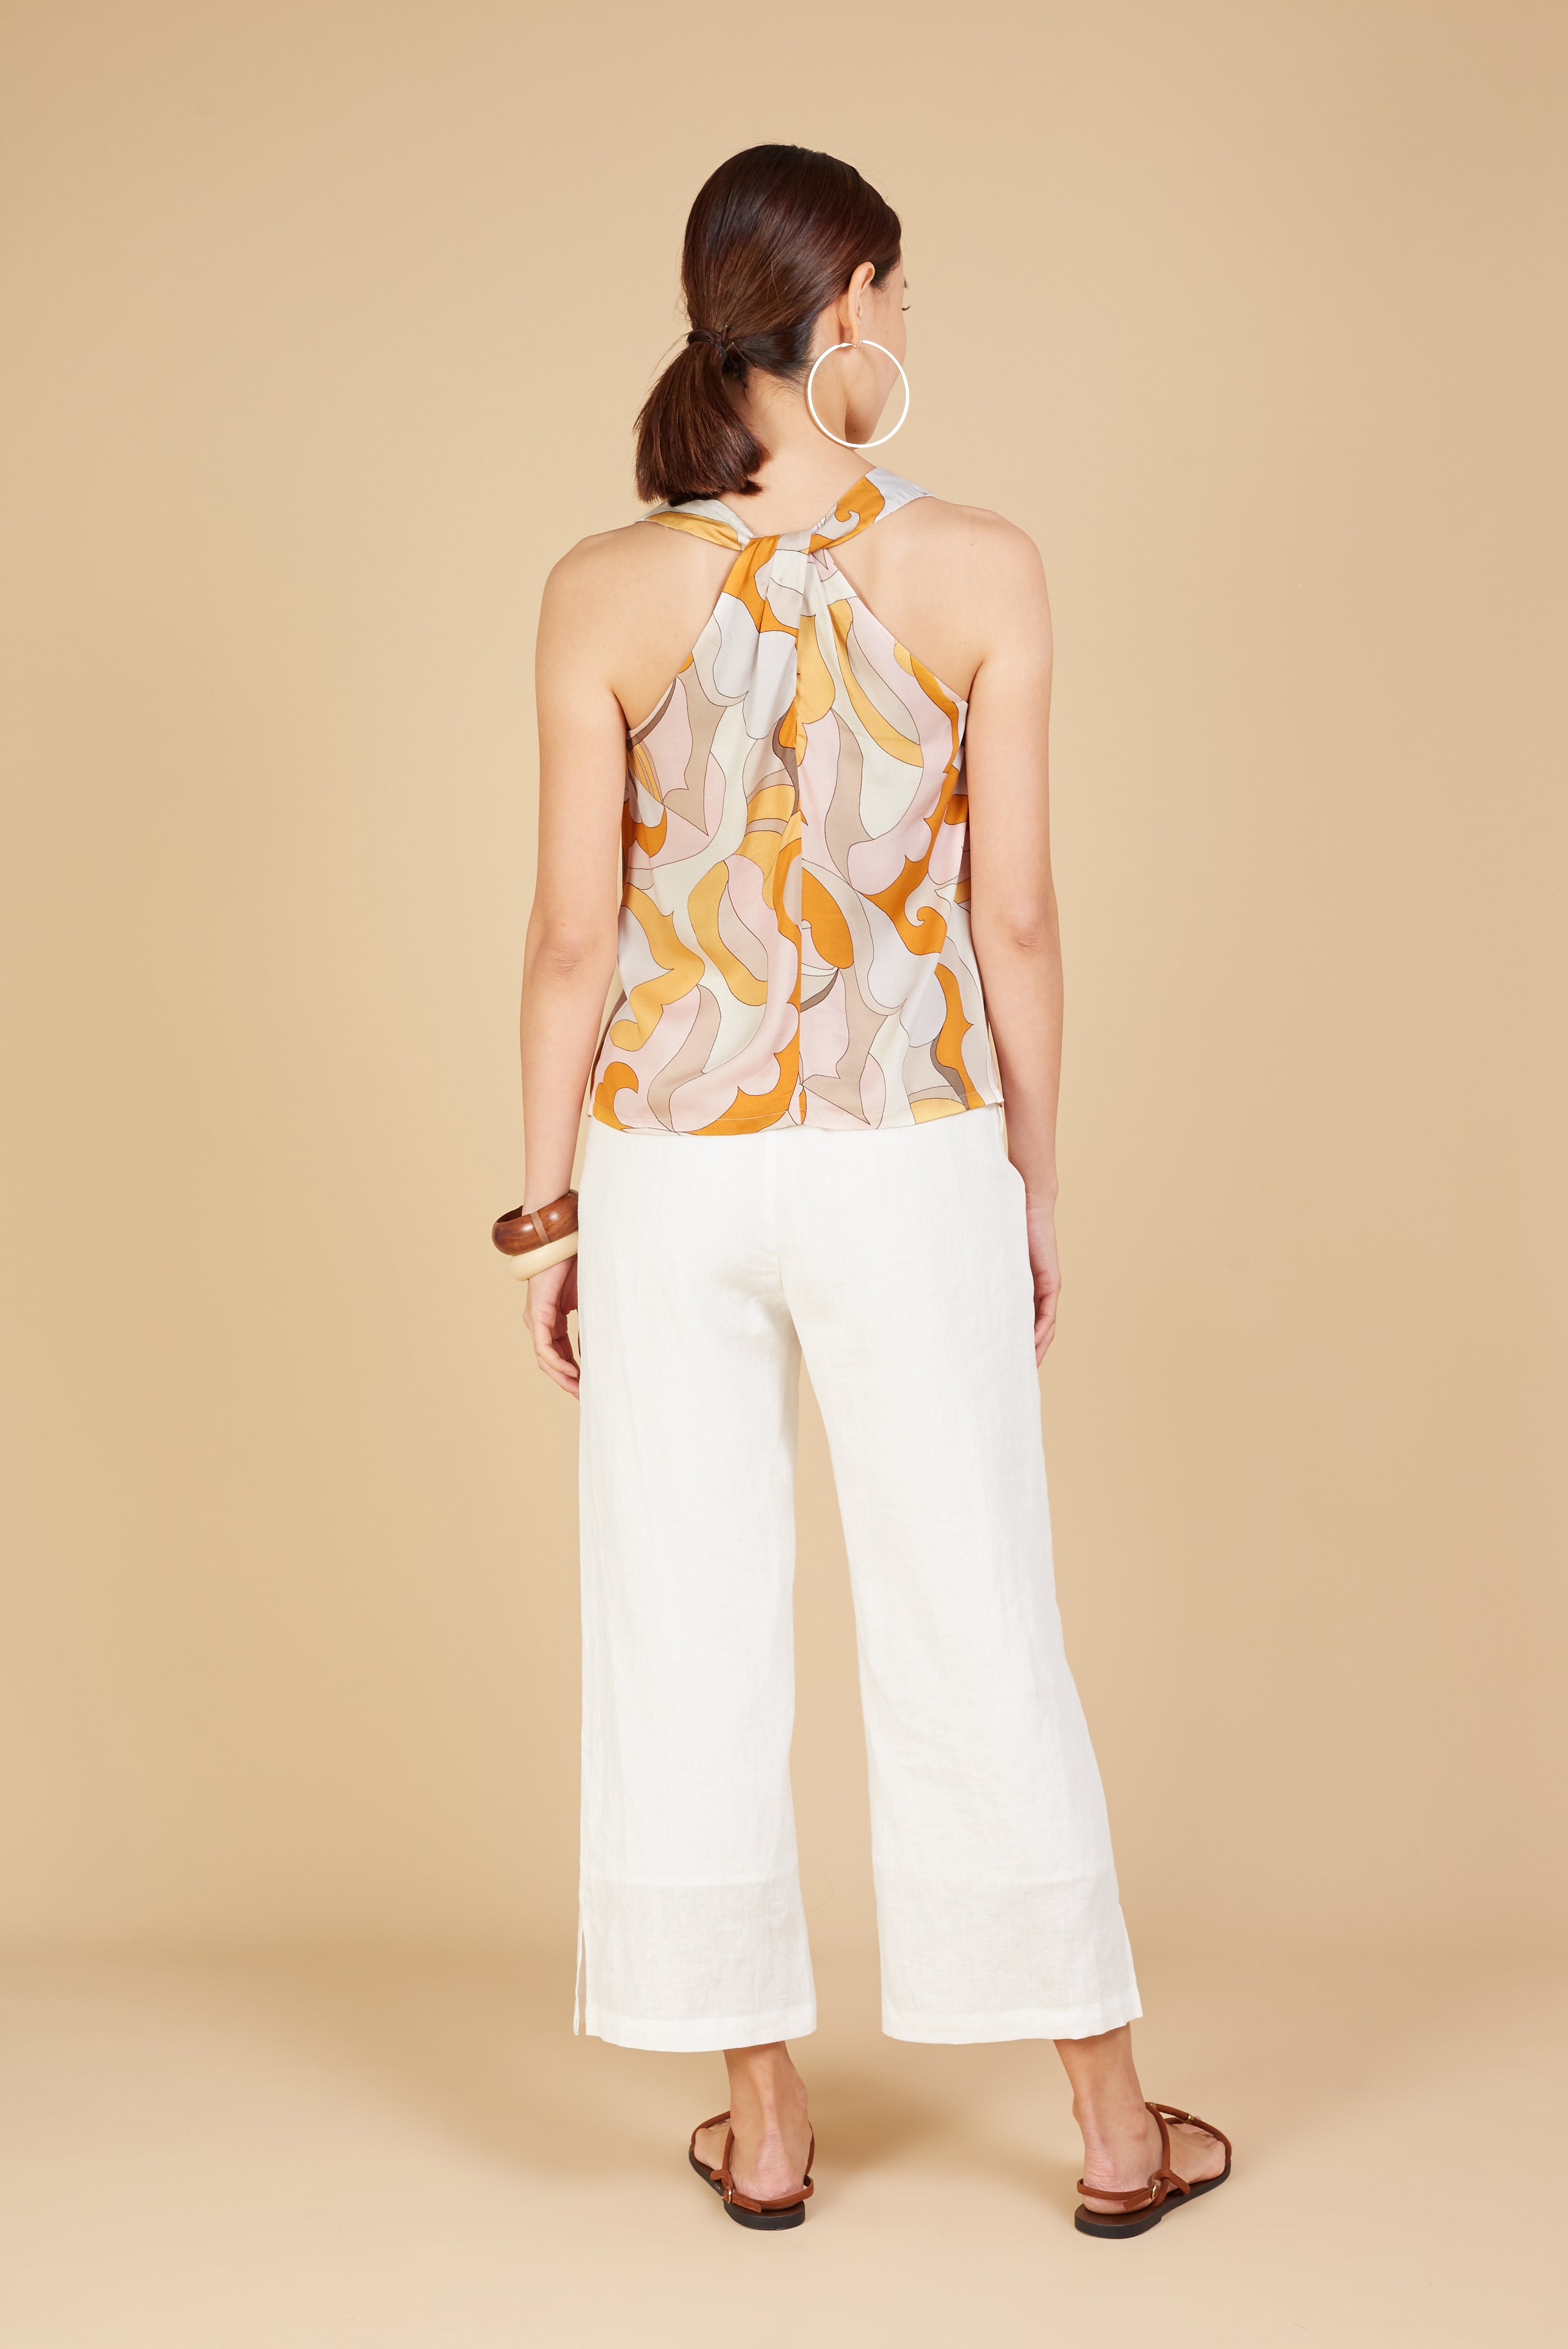 Lausry Summer Twisted Top